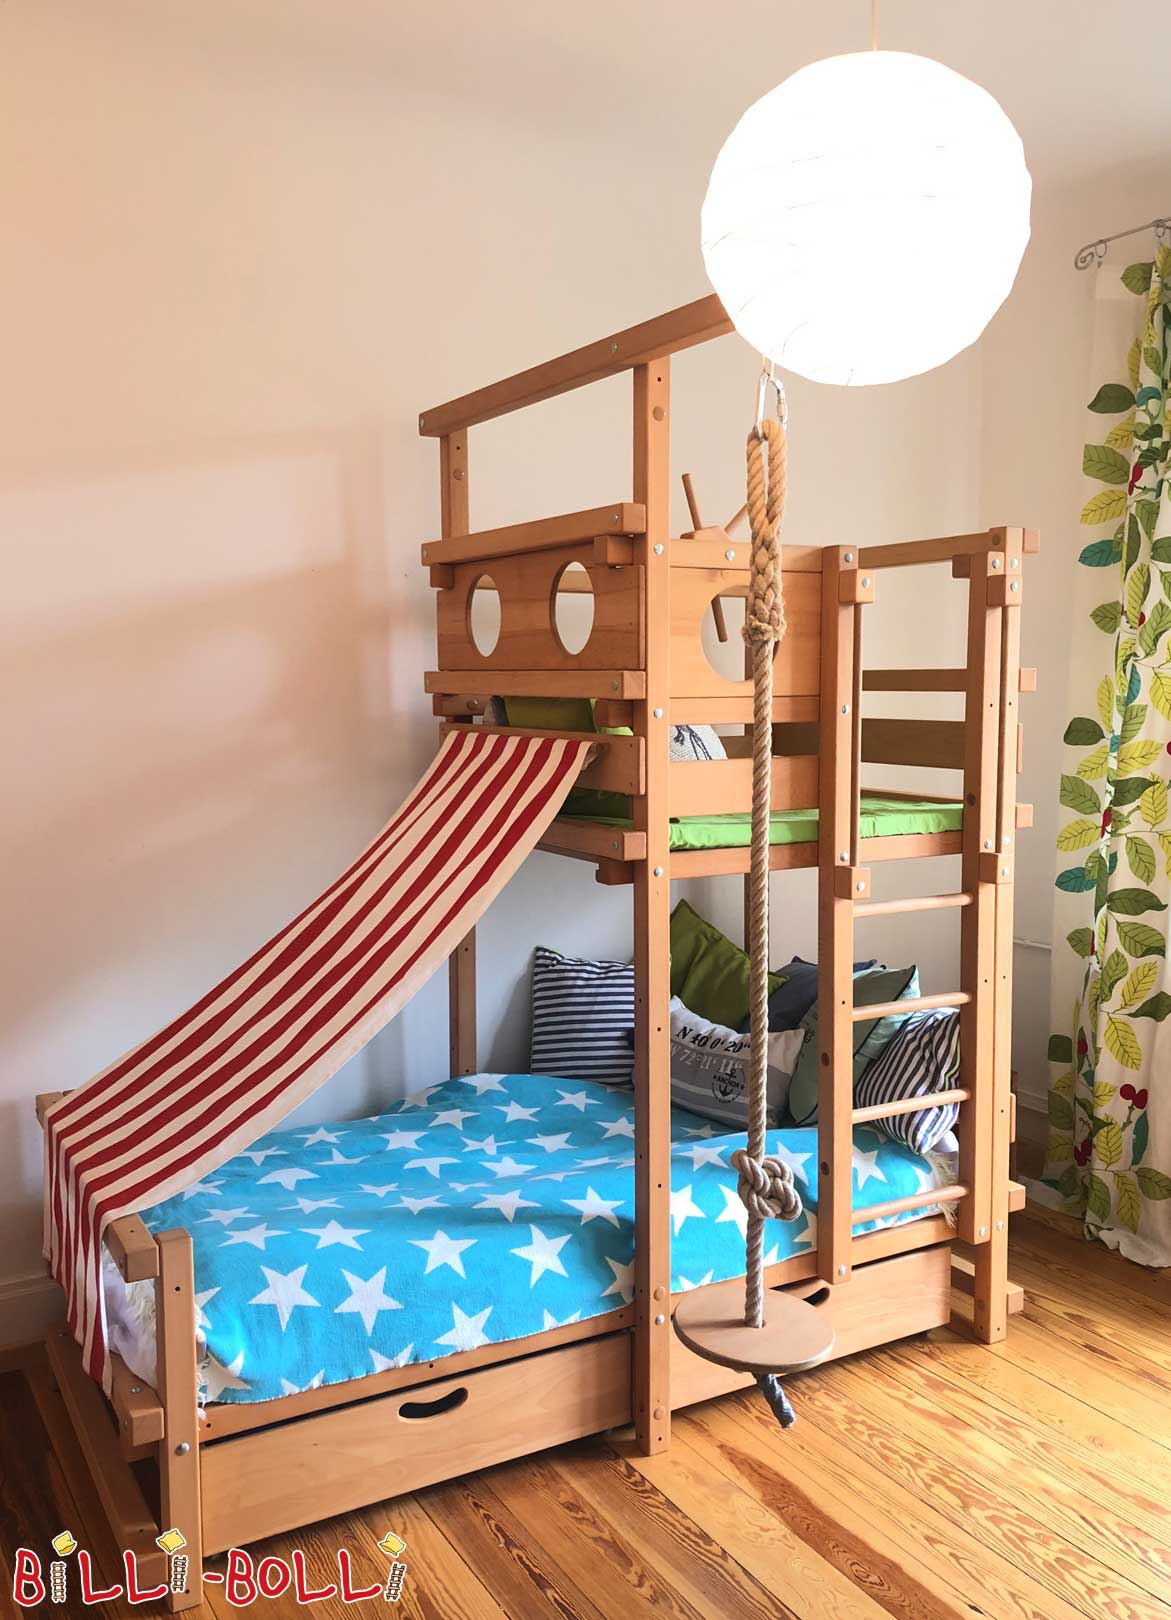 Pitched Roof Bed: The ingenious kids’ play bed for the pitched roof